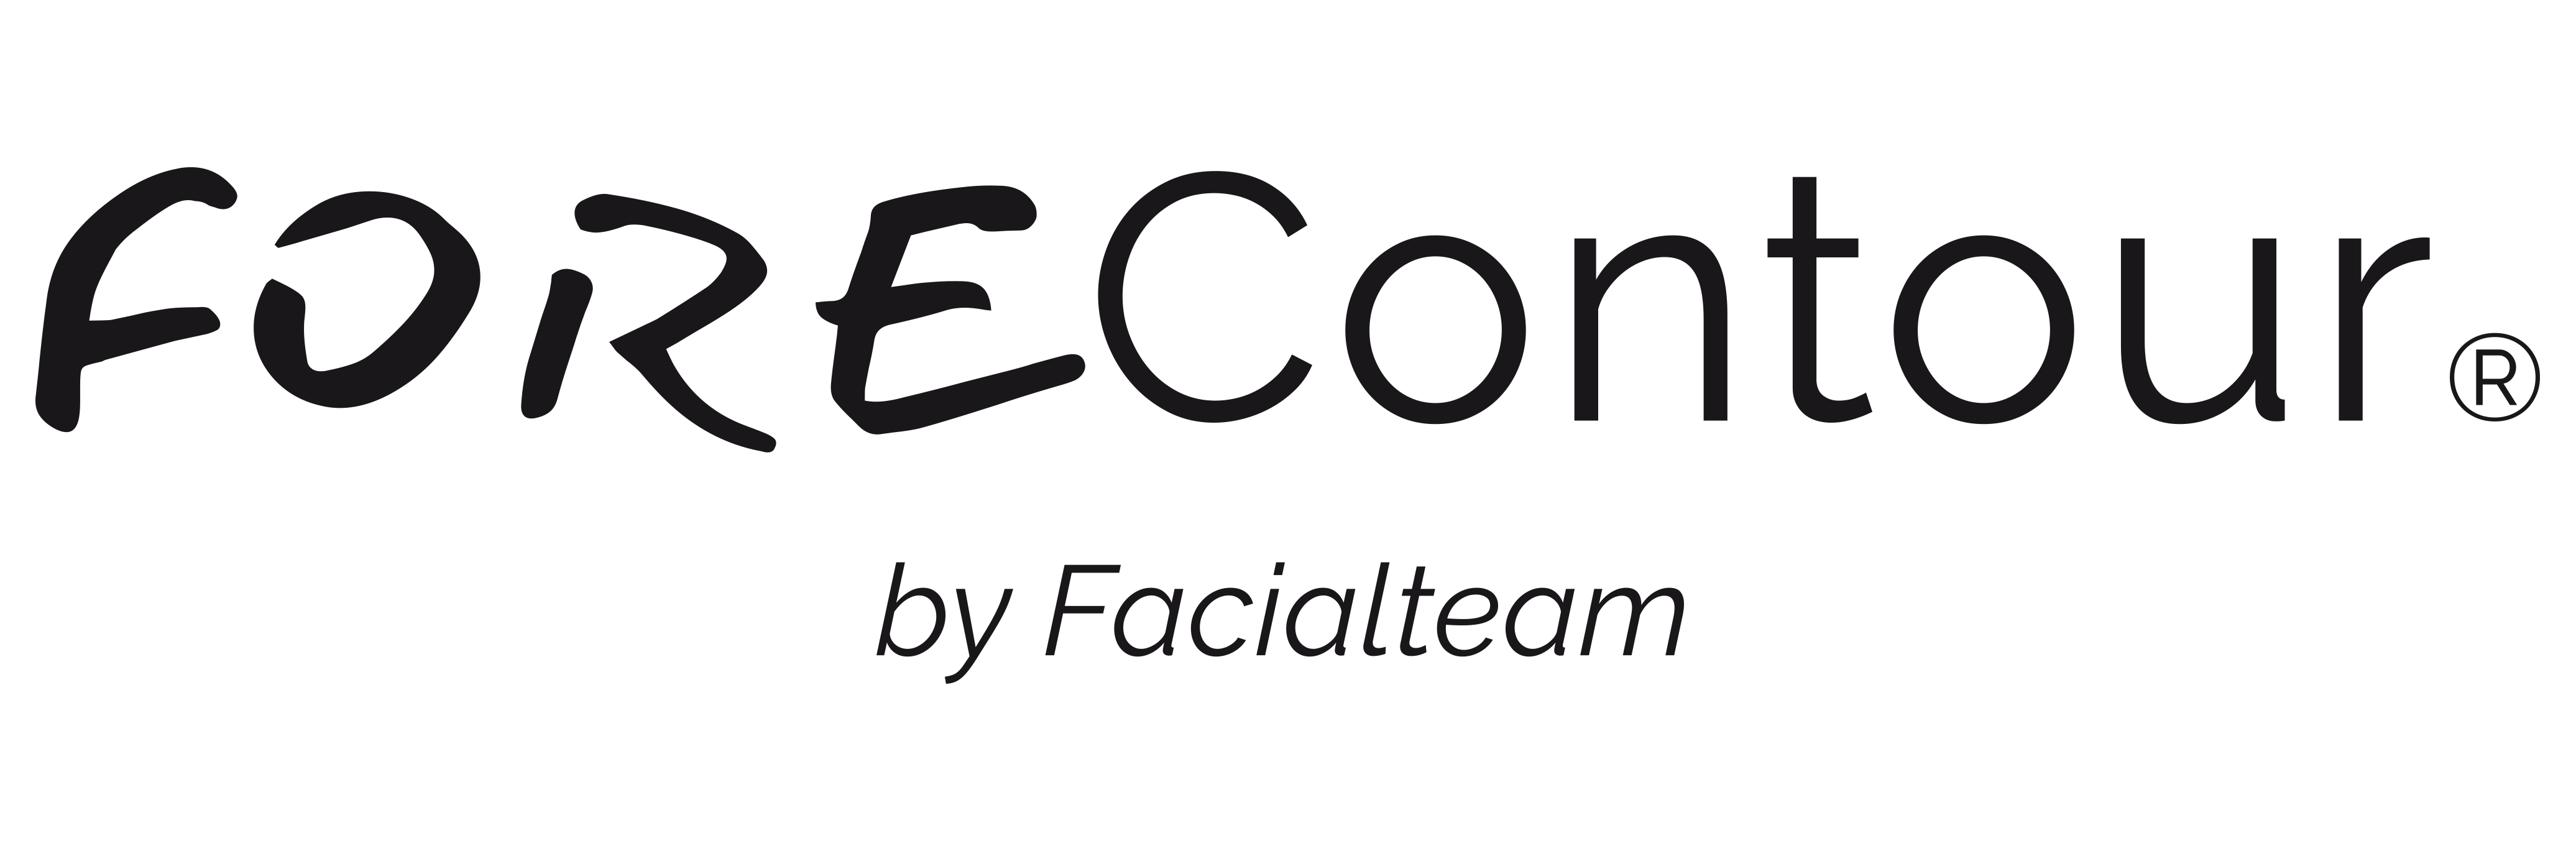 Logo of forecontour, an in-house developed patented method to perform high-end forehead reduction surgery